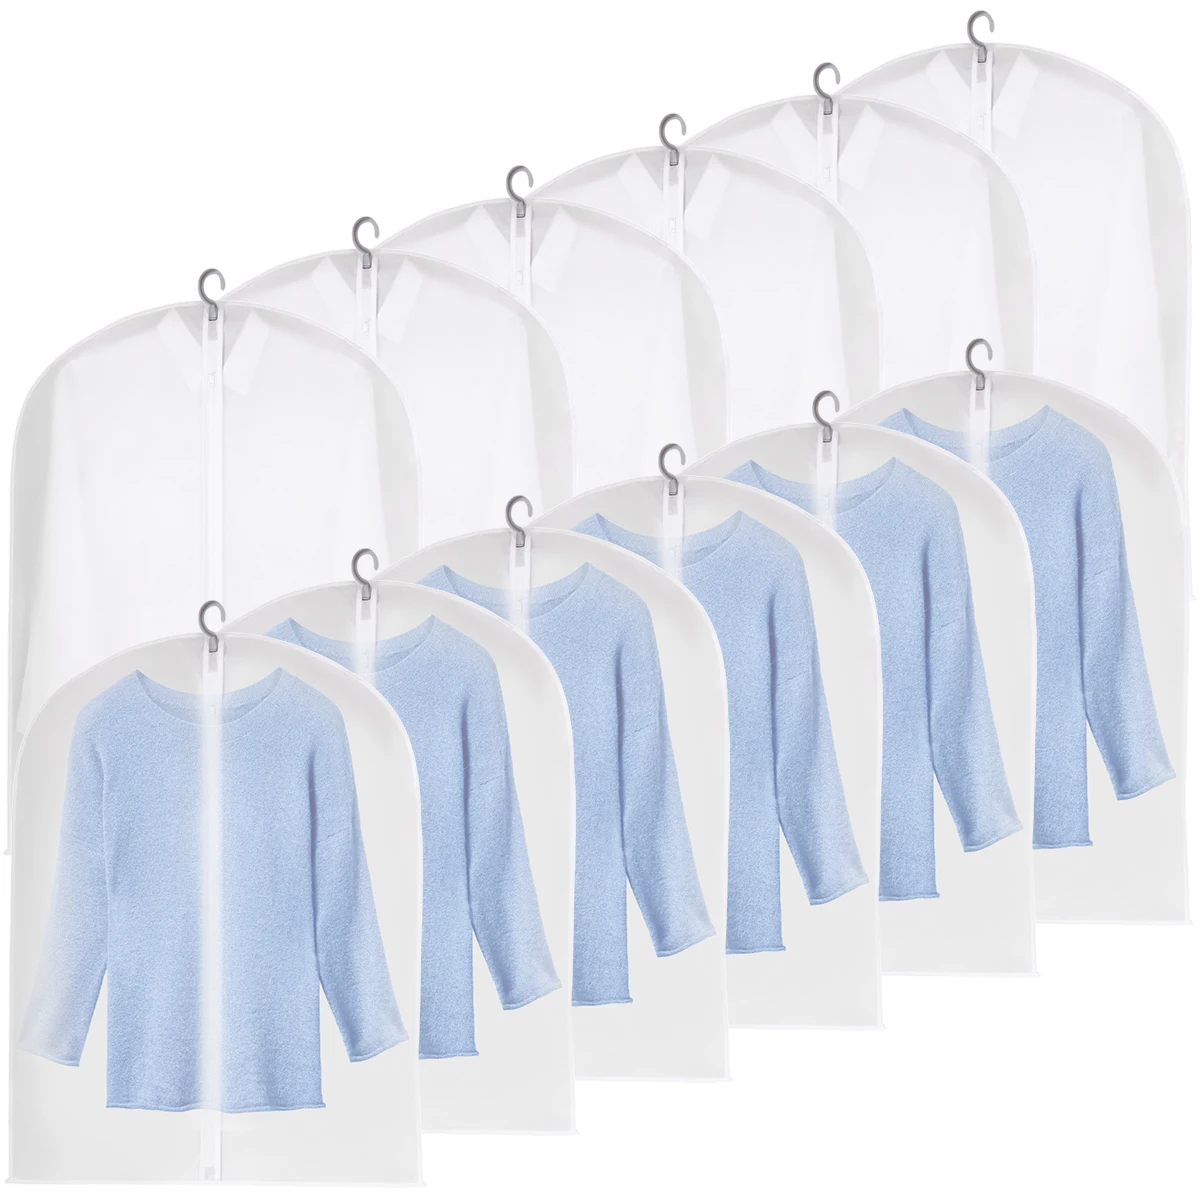 

12Pcs Clear Garment Bags Reusable Clothes Cover Bags with Full Zipper PEVA Breathable Clothes Hanging Covers Dust-Proof Dress